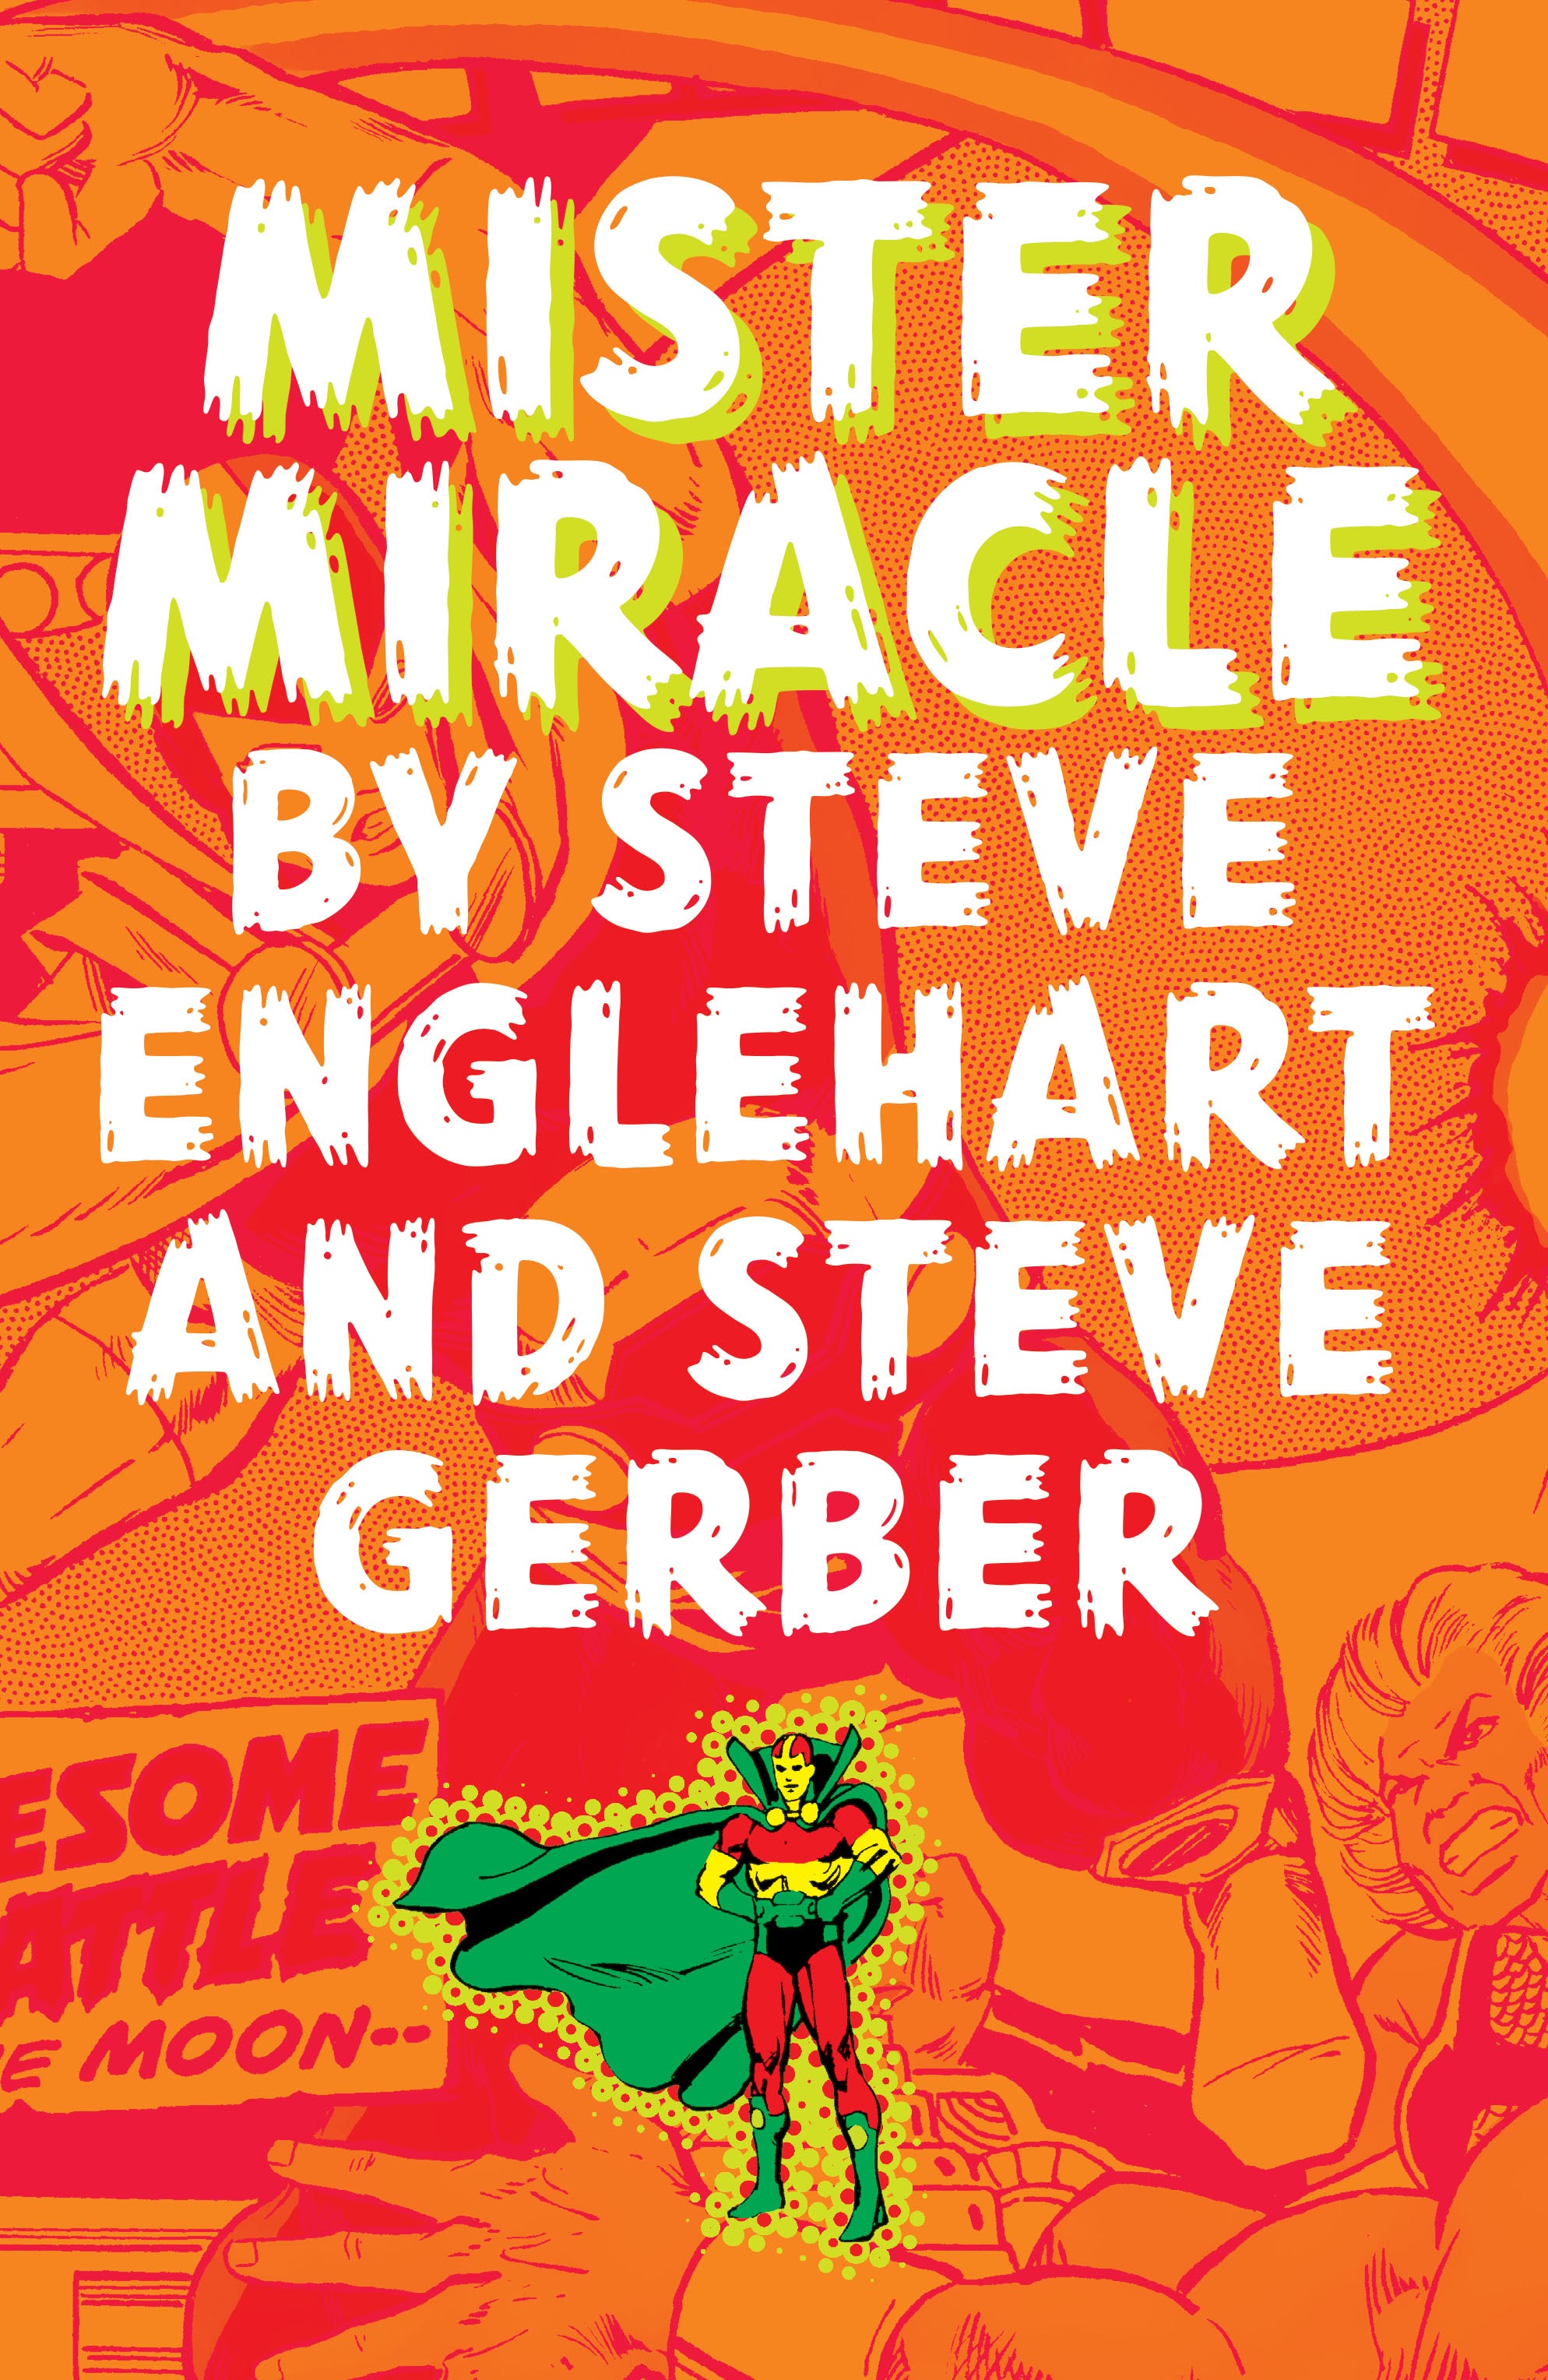 Read online Mister Miracle by Steve Englehart and Steve Gerber comic -  Issue # TPB (Part 1) - 2